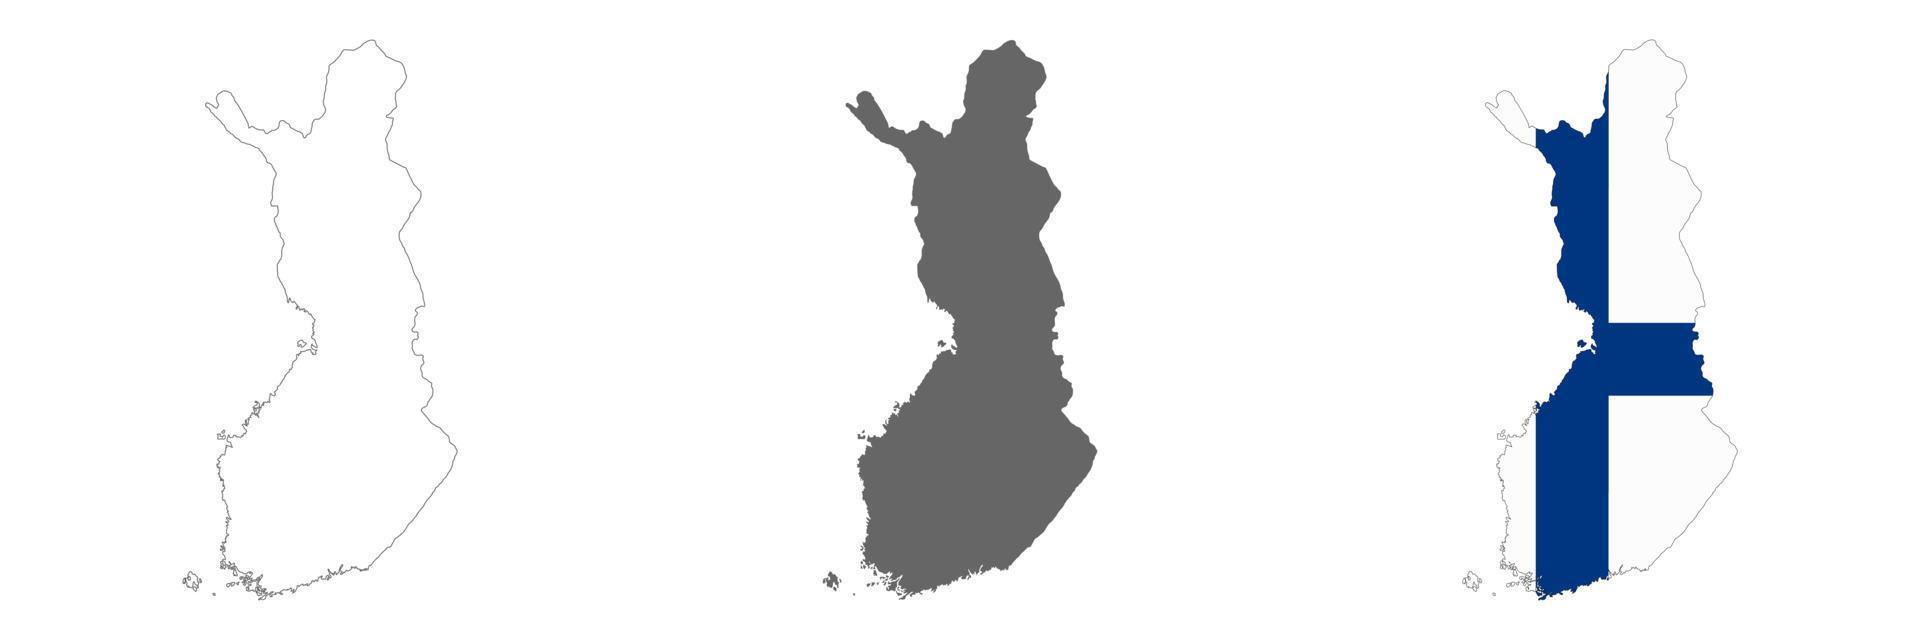 Highly detailed Finland map with borders isolated on background vector